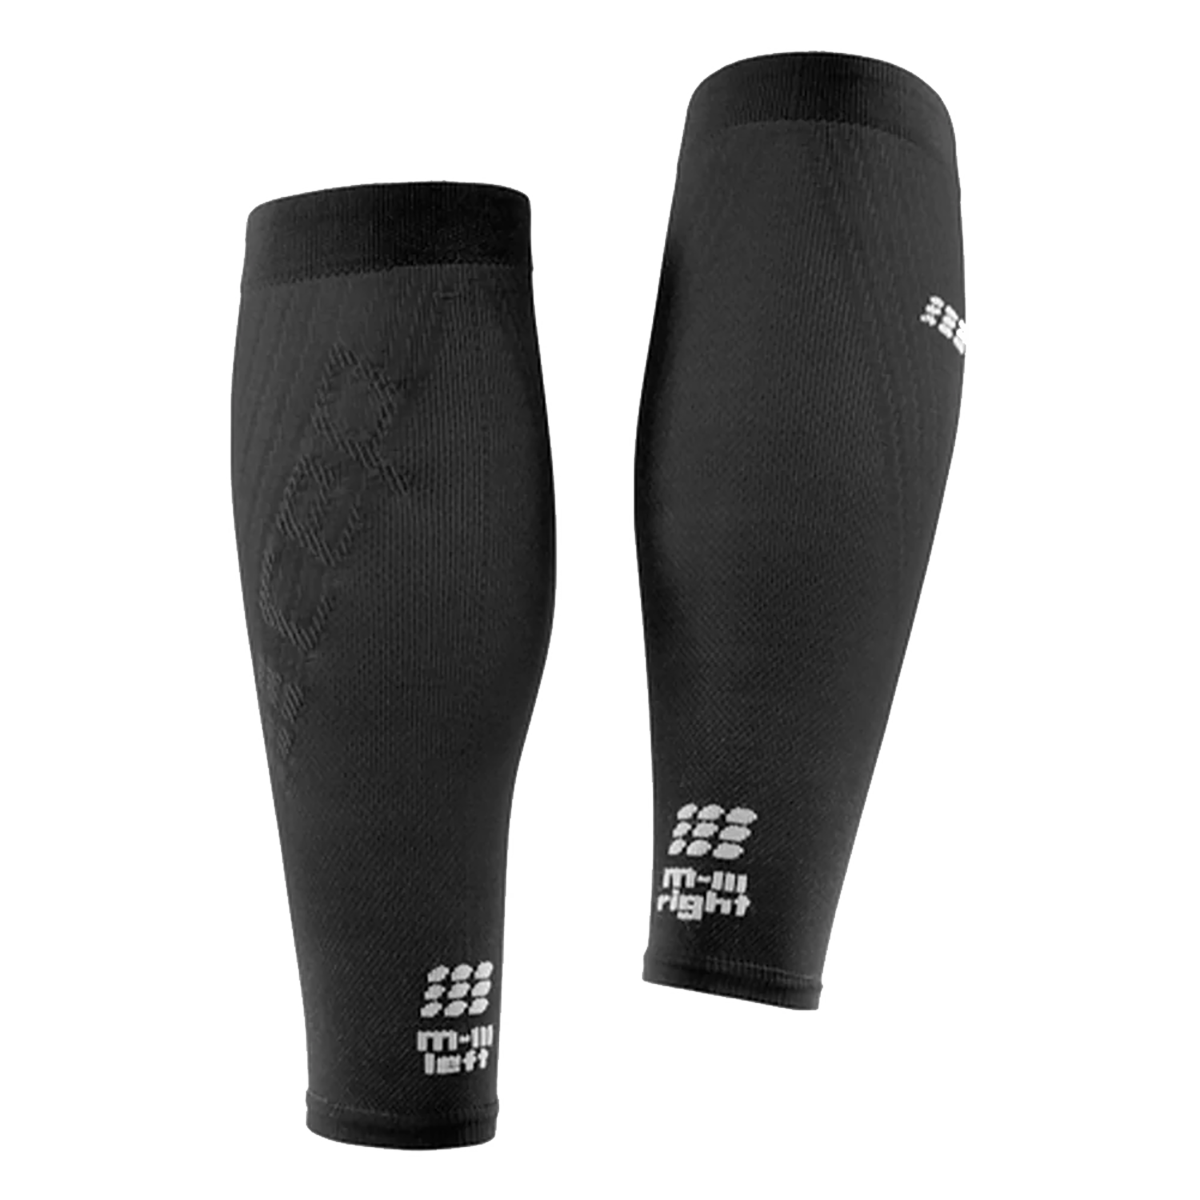 CEP Ultralight Calf Sleeve, , large image number null